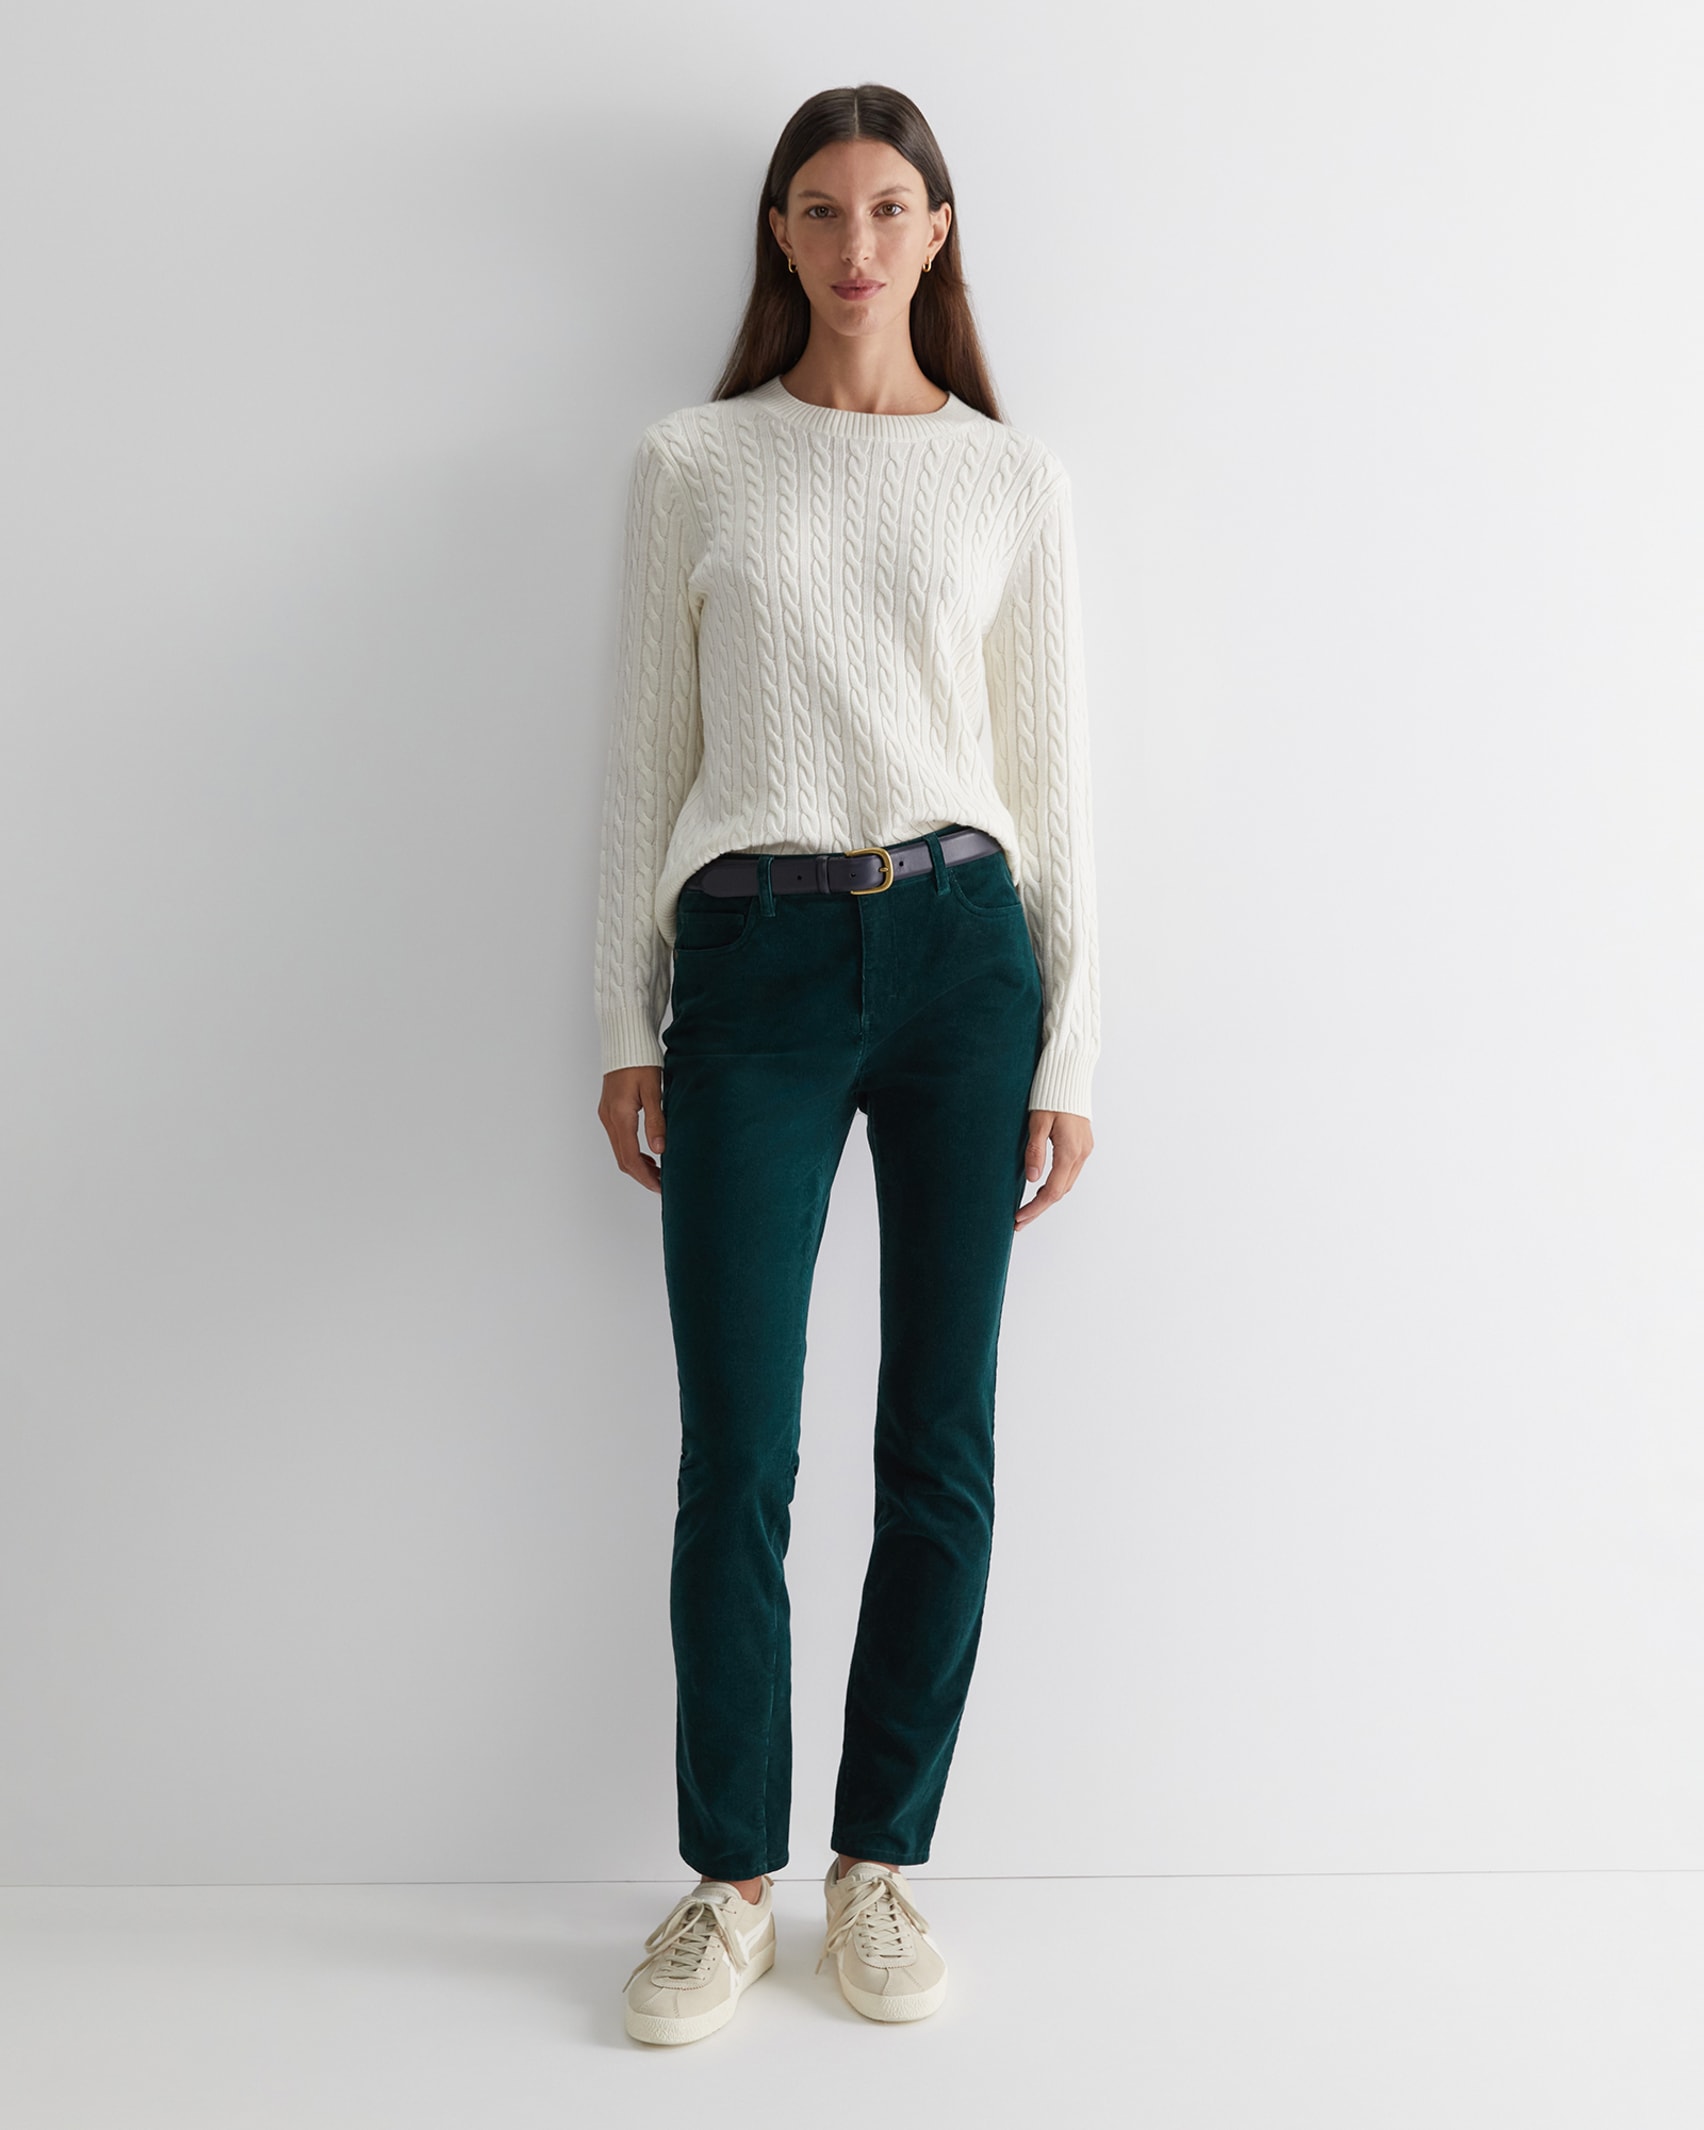 Cleo Cord Jean in PINE